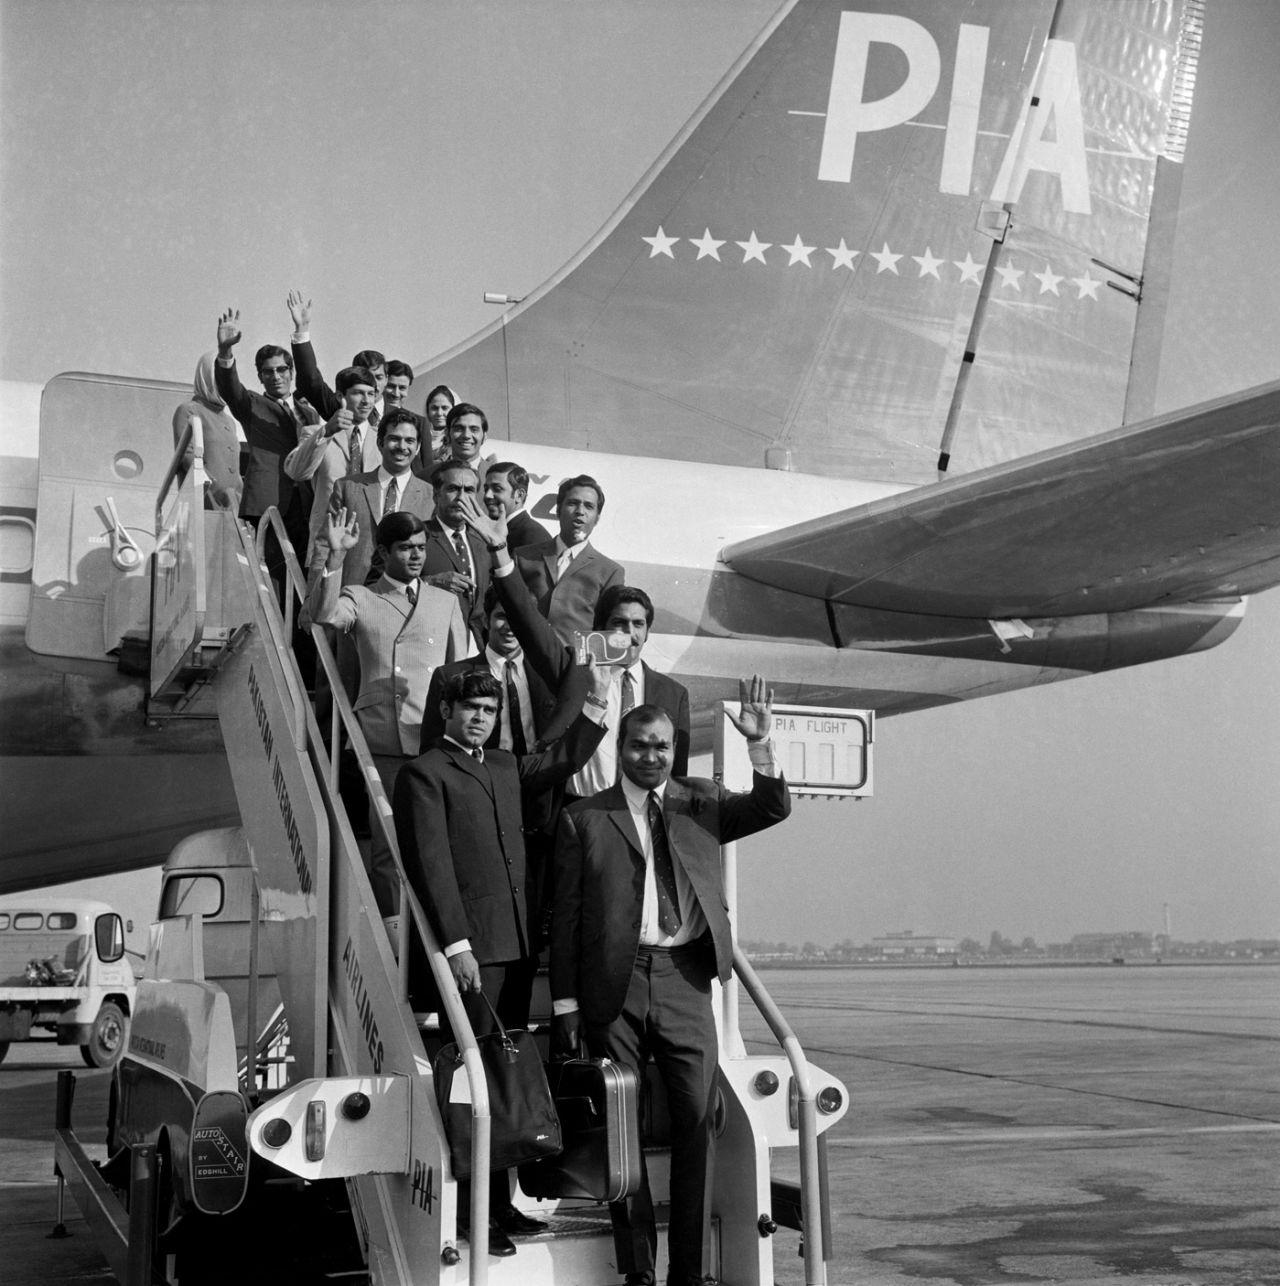 The Pakistan players, led by Intikhab Alam, arrive in England, April 27, 1971